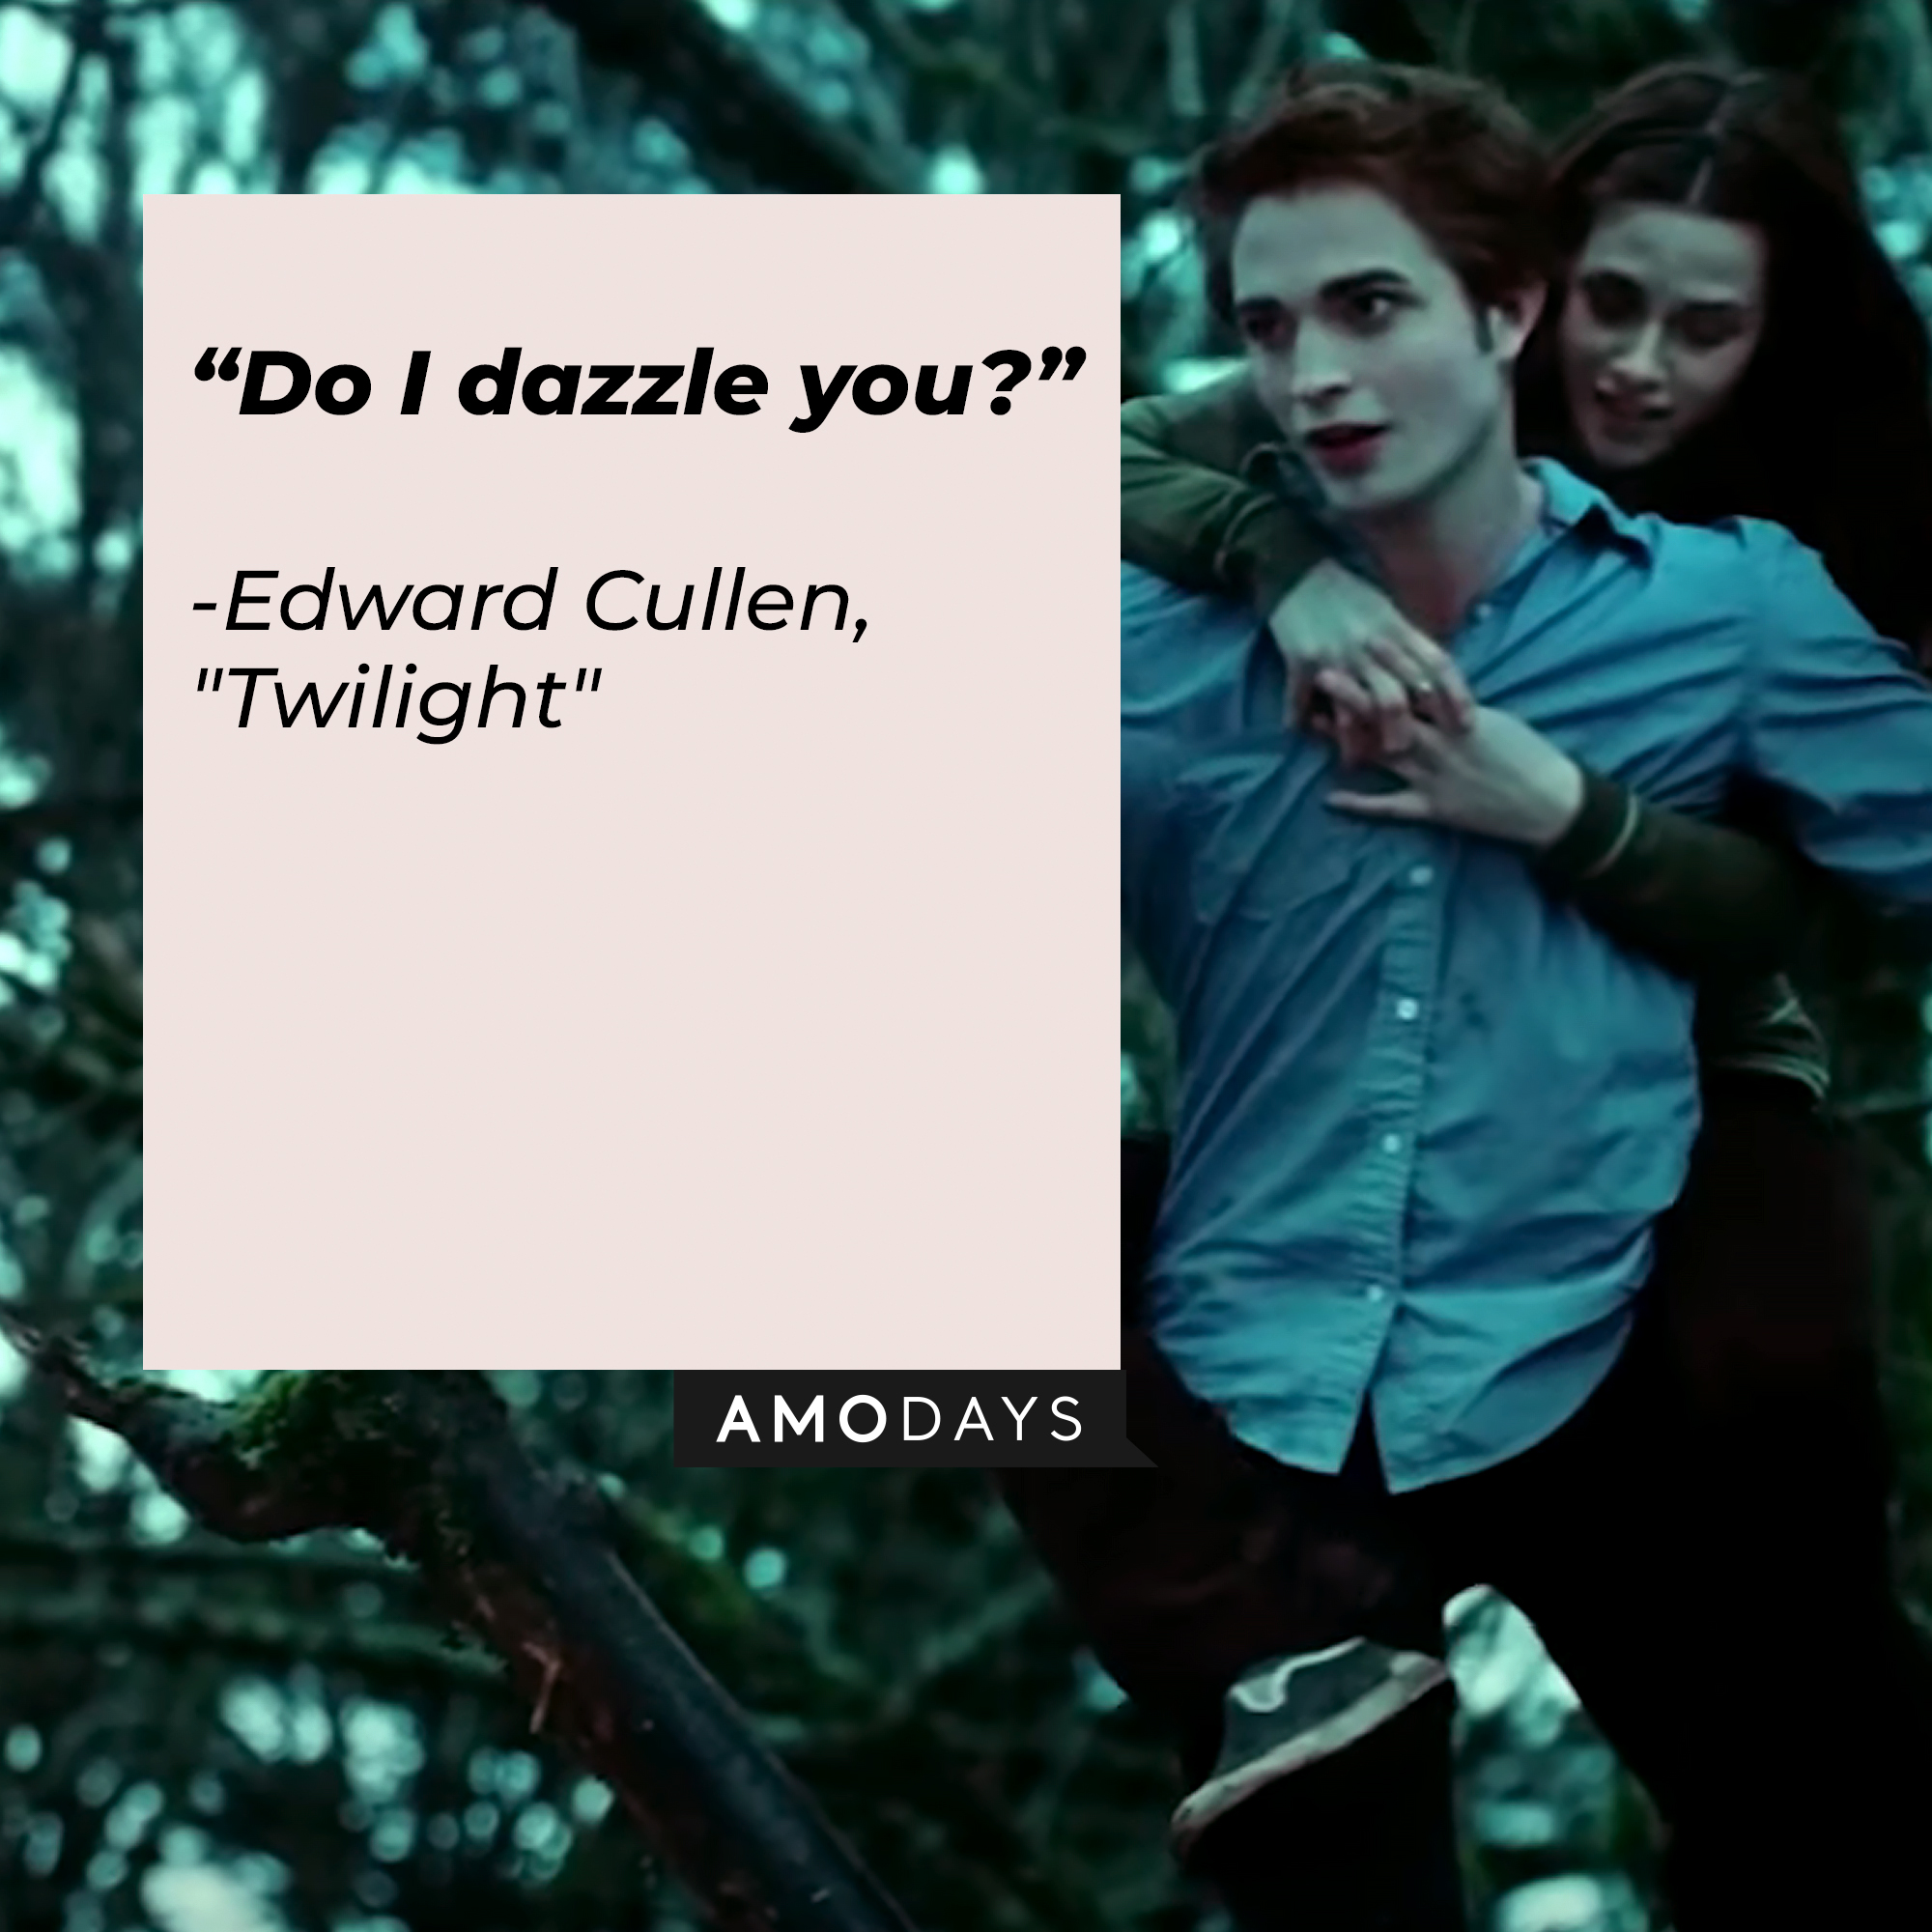 Edward Cullen with his quote: “Do I dazzle you?” | Source: Facebook.com/twilight